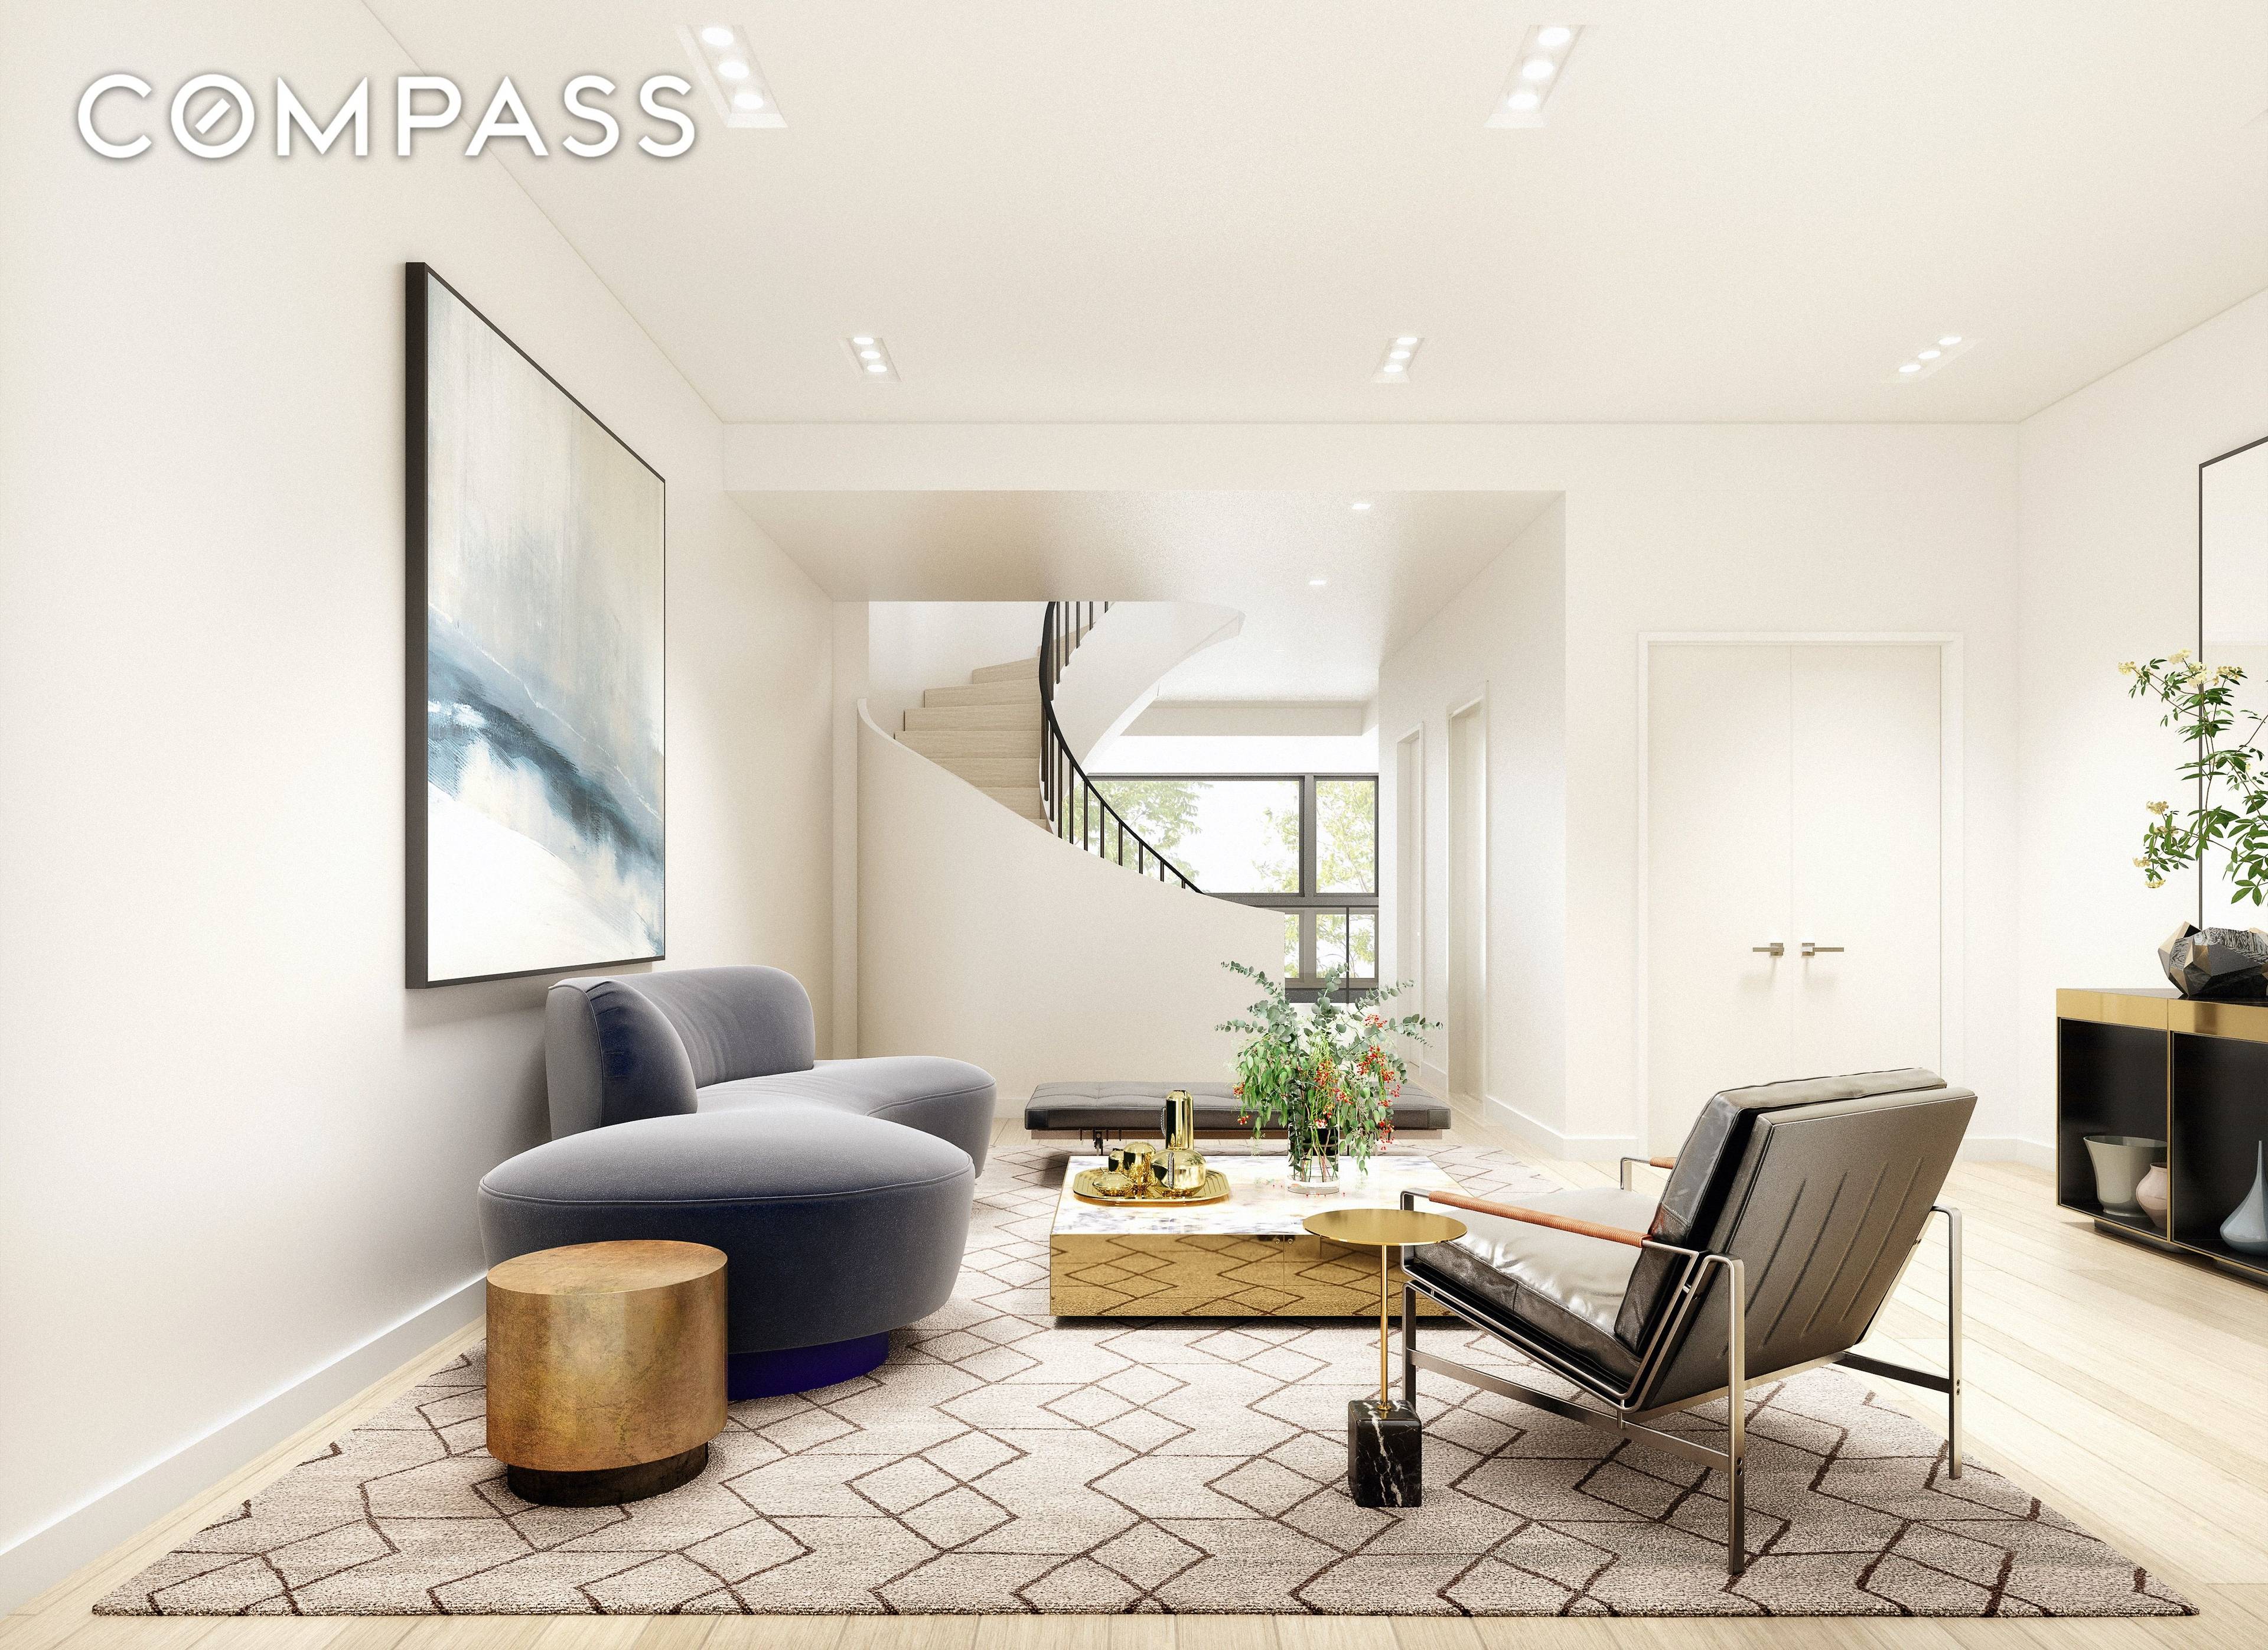 Brilliantly envisioned by ODA Architecture to maximize light and space, the 5 bedroom, 6 bathroom residence at 224 West 22nd Street is a stunning modern take on a classic townhouse.